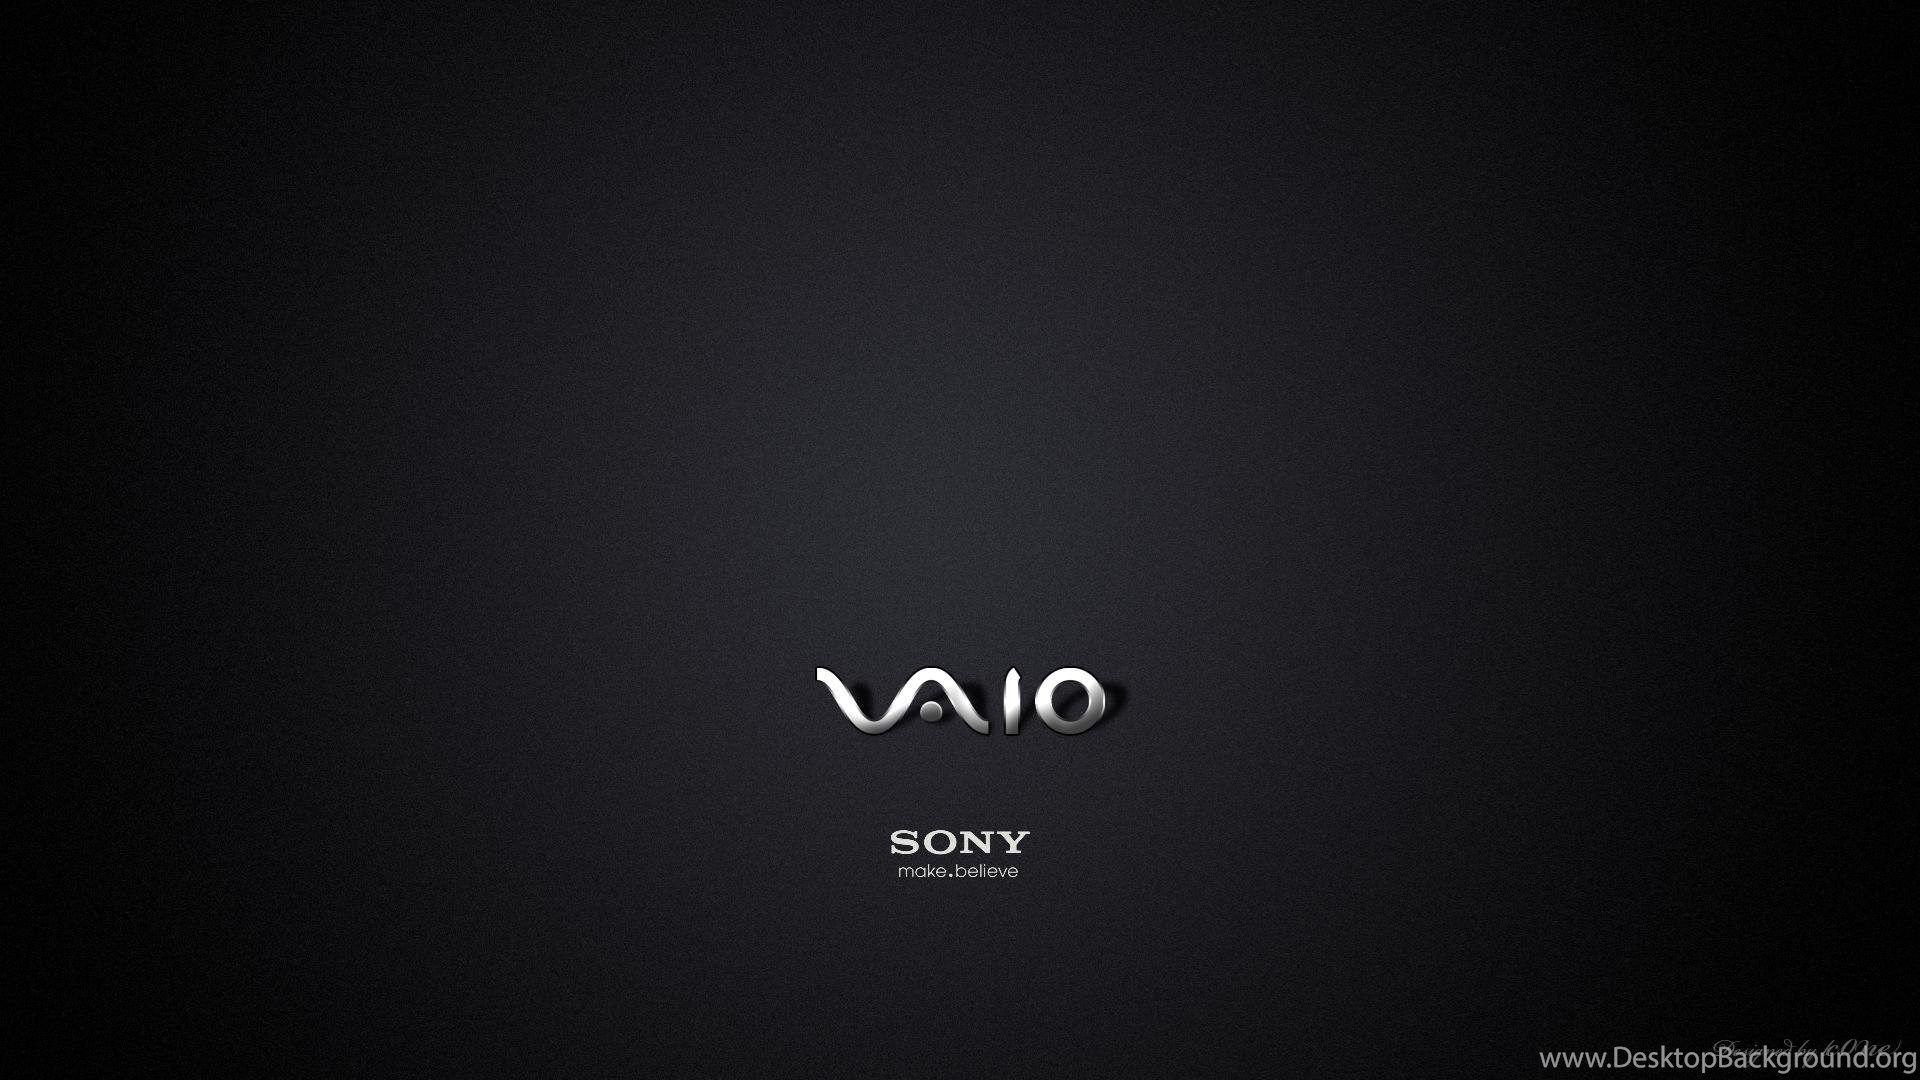 Sony Vaio Windows 7 Wallpapers Top Free Sony Vaio Windows 7 Backgrounds Wallpaperaccess